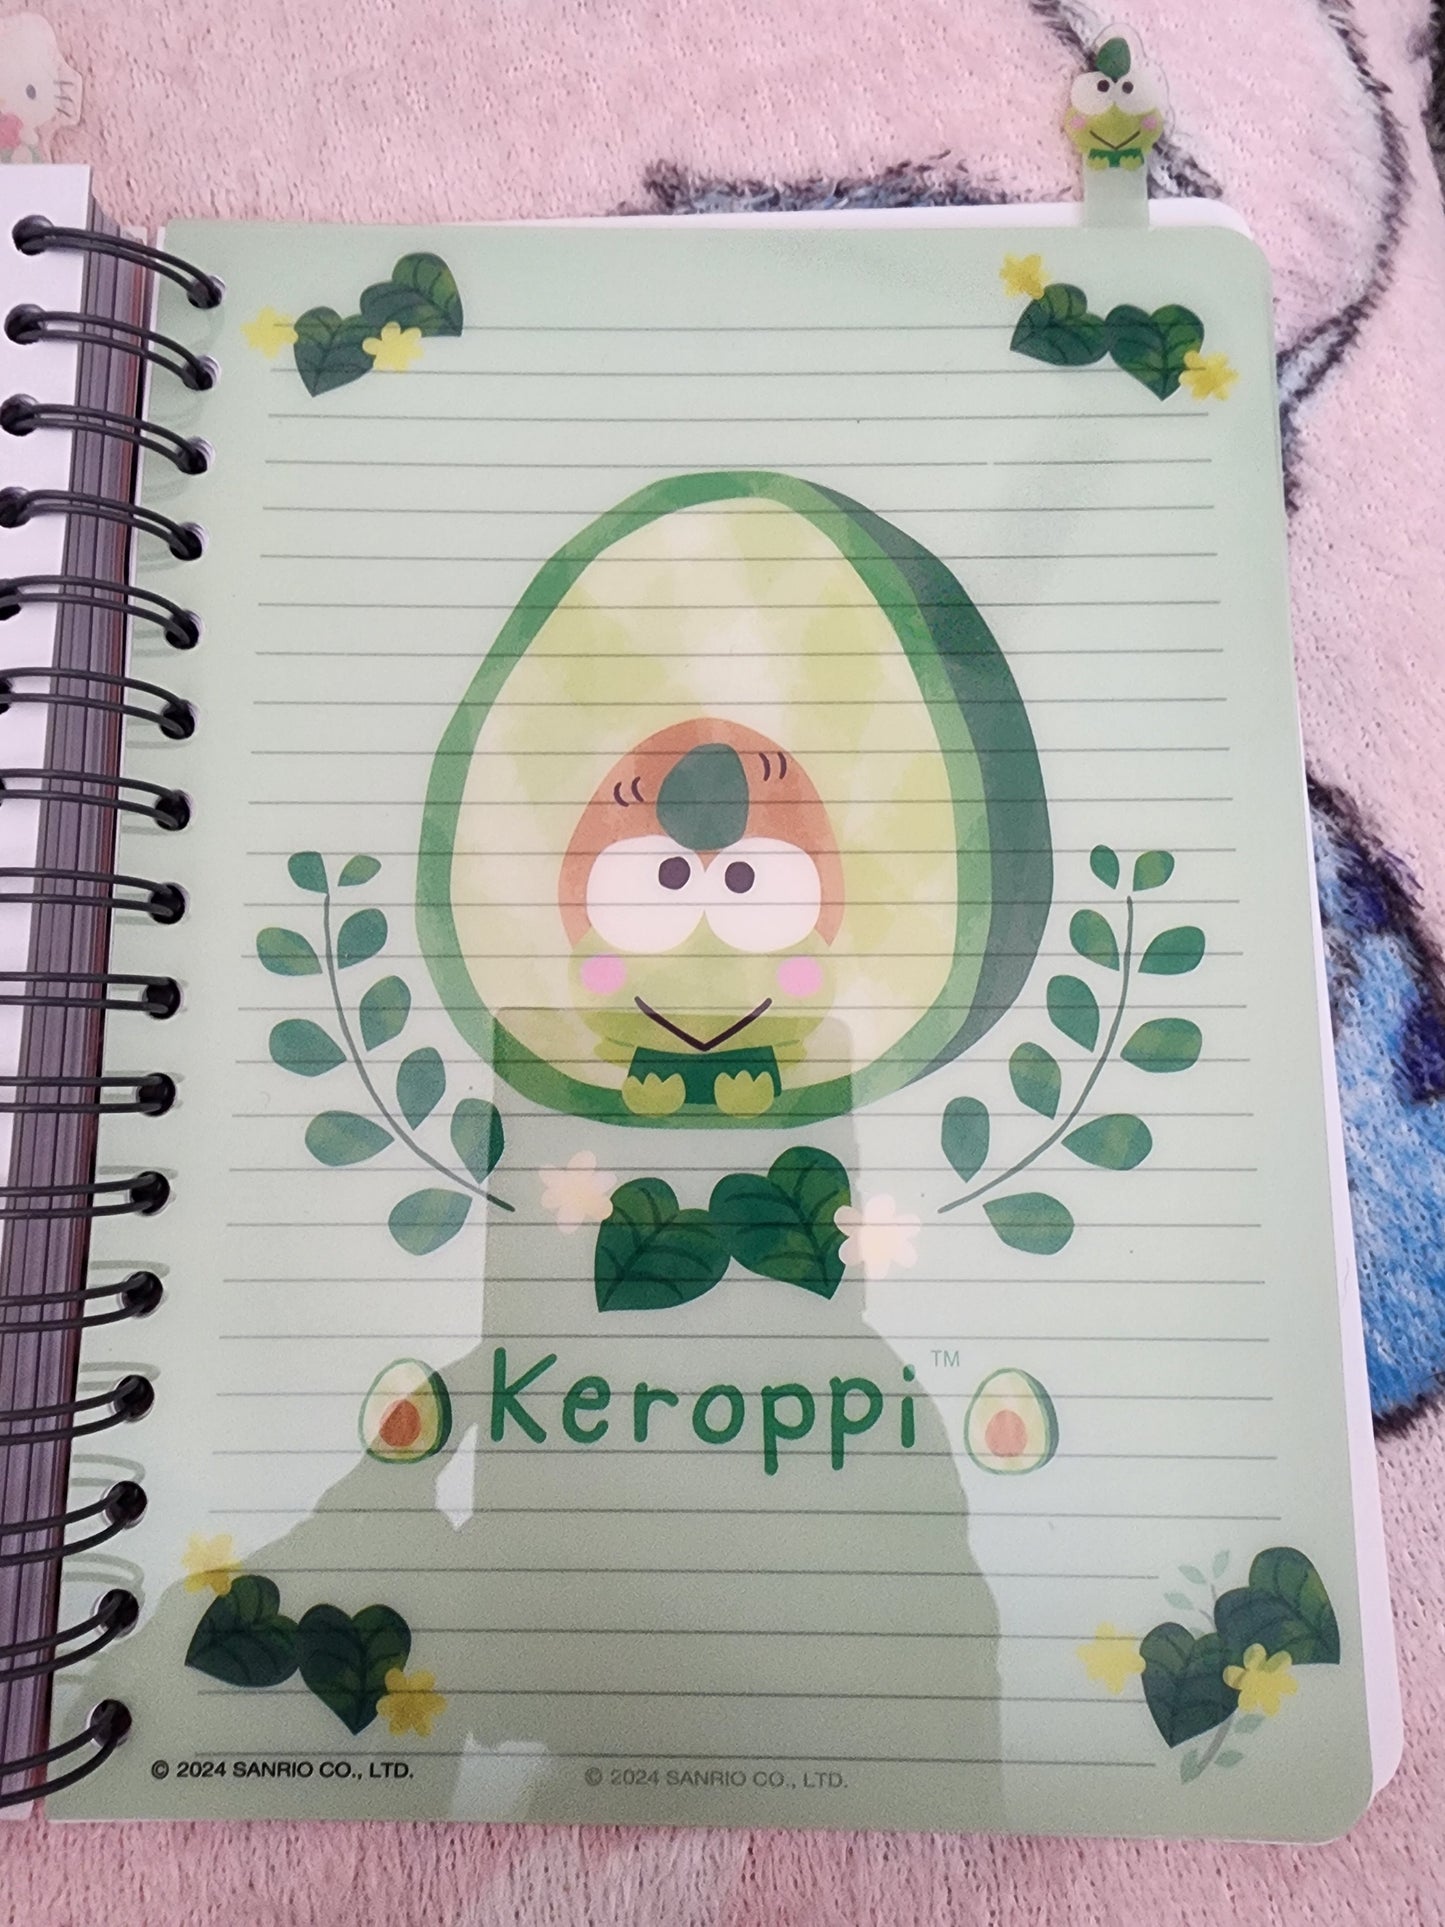 Hello Kitty and Friends Fruit Notebook